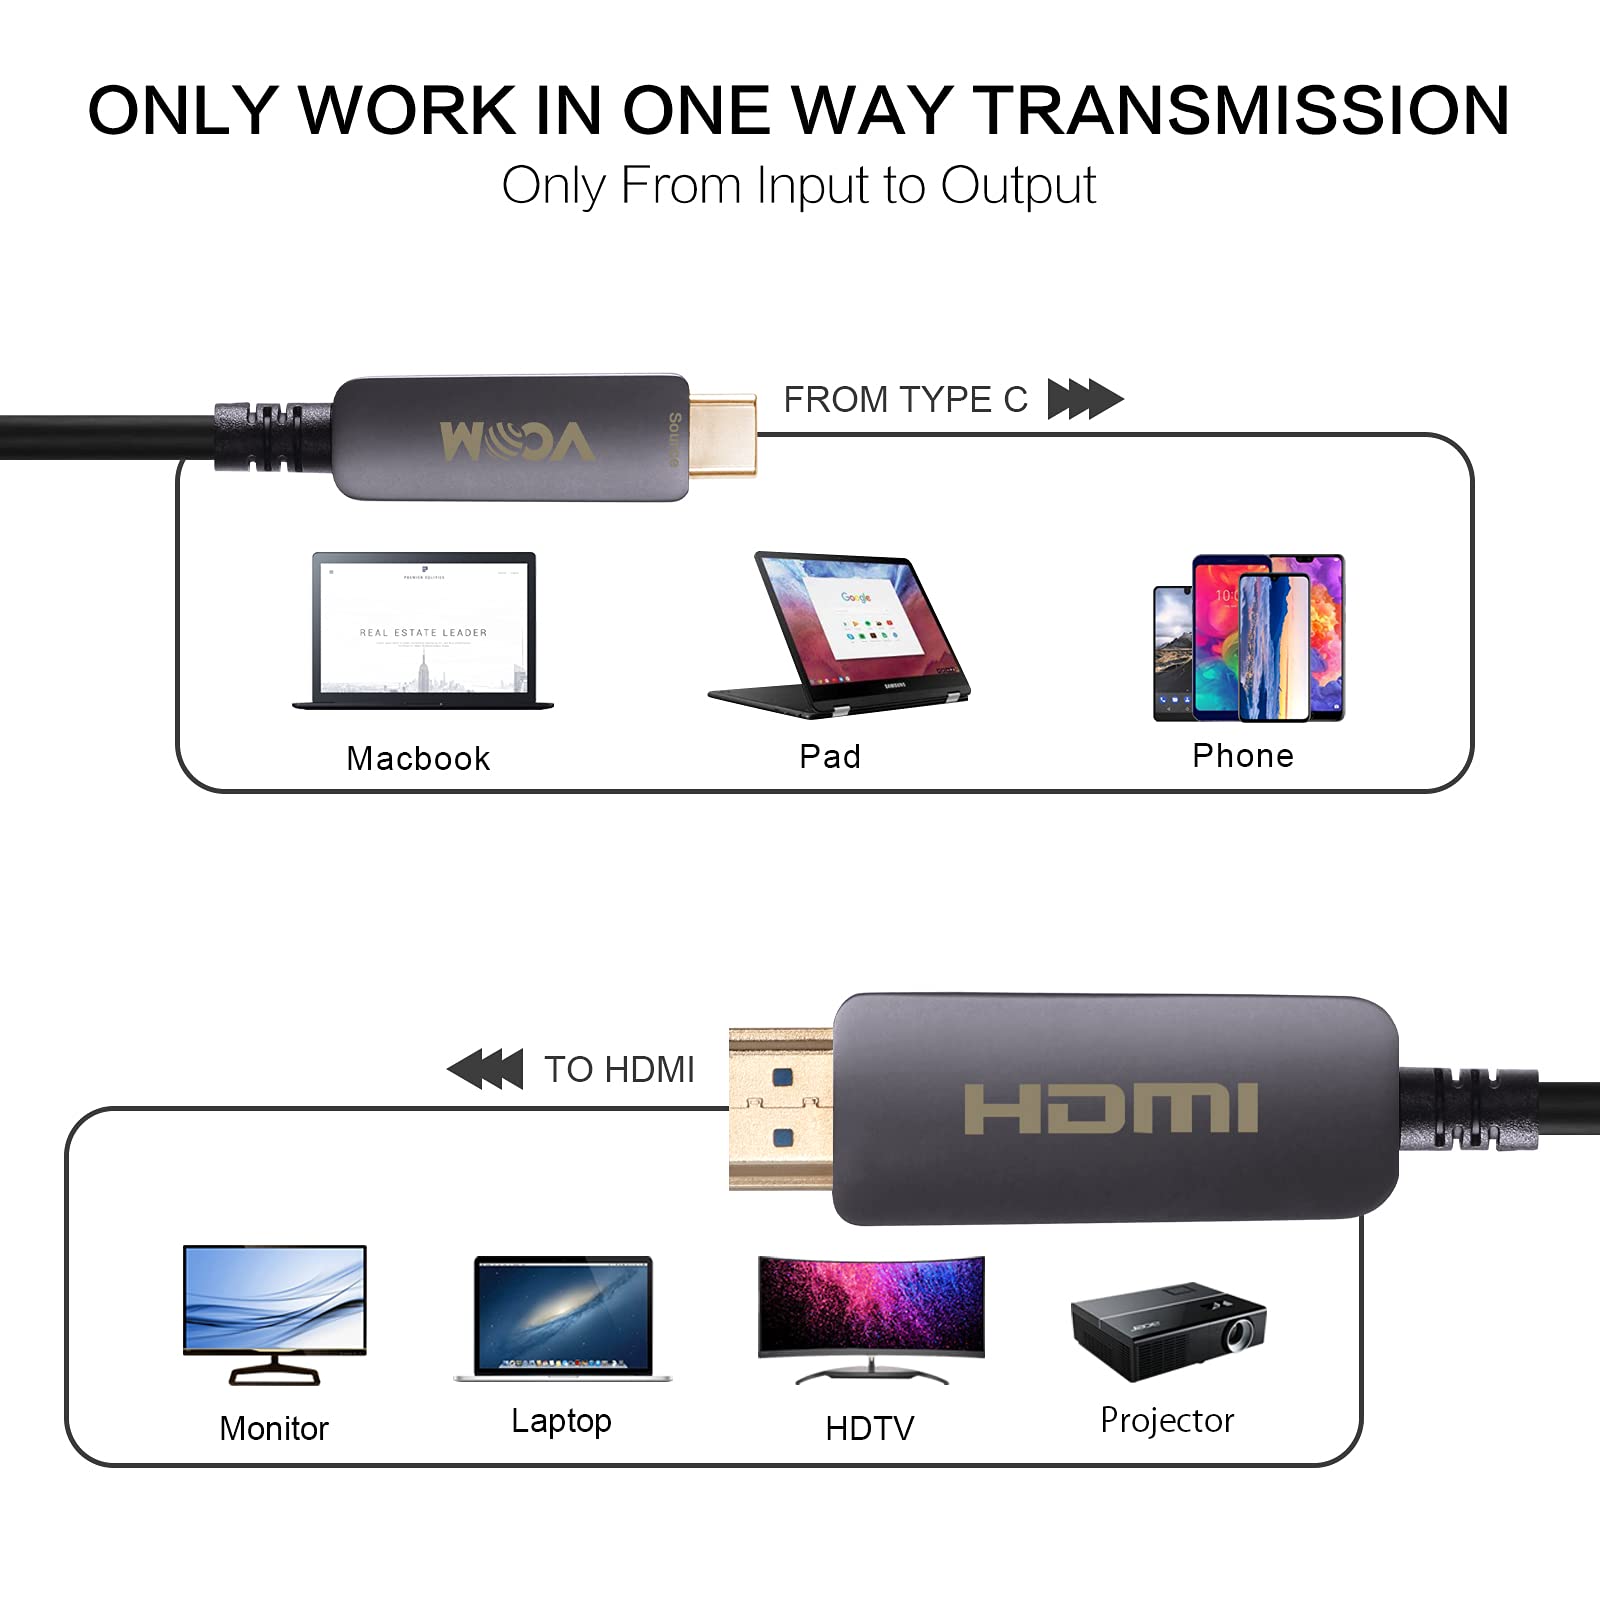 VCOM USB-C to HDMI Fiber Optic Cable, Support 18Gbps, 4K@60Hz, HDCP 2.2, HDR, Thunderbolt 3/4, Type C 3.1 to HDMI 2.0 Cord Compatible with MacBook Pro/Air, Surface Go, Tablets, Laptops, Switch (33ft)